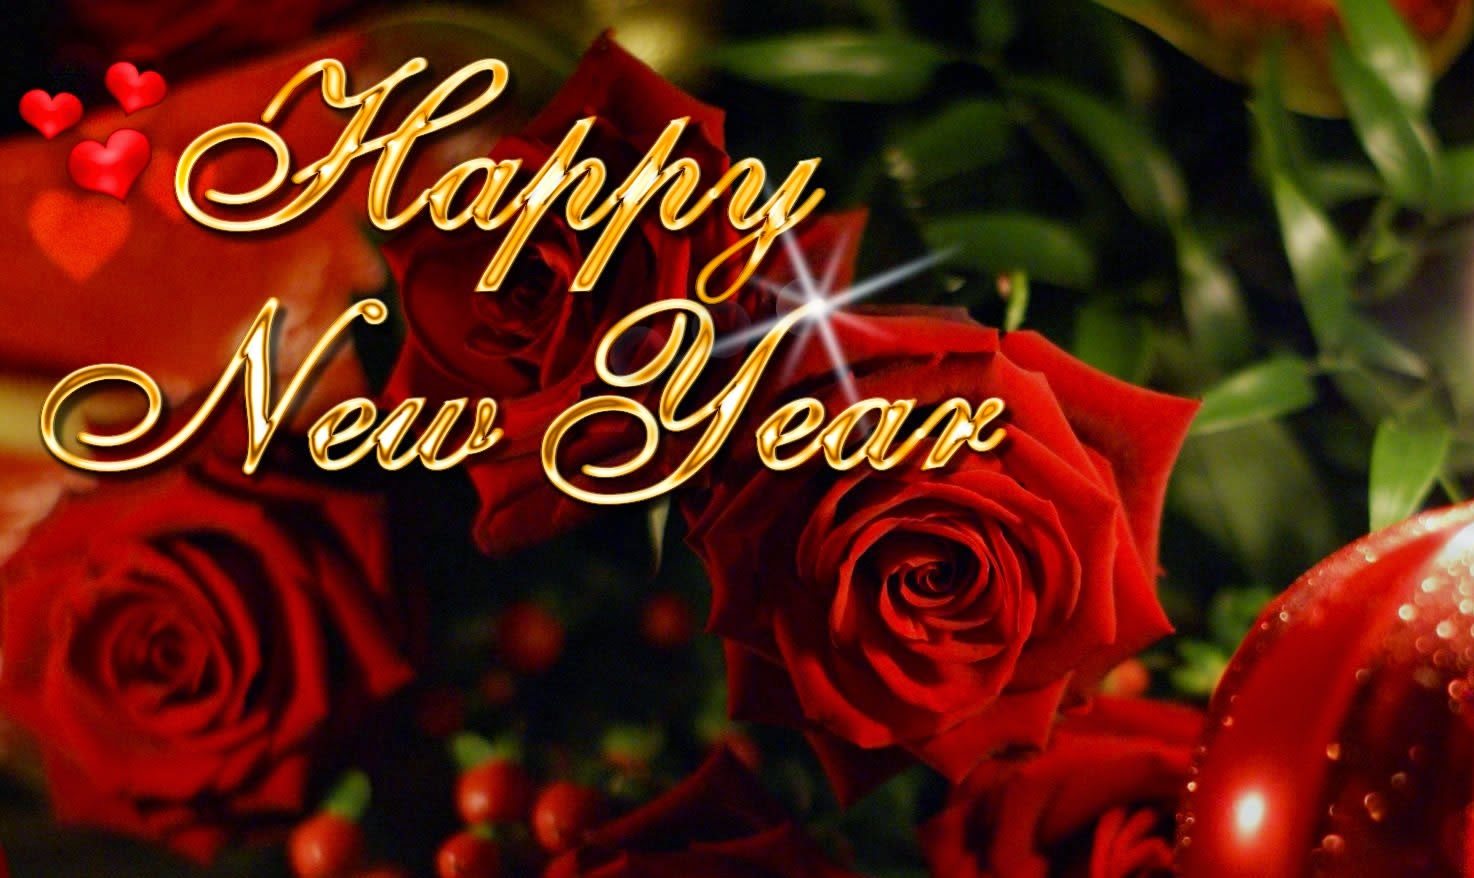 Happy New Year Wish In Red Flower - Happy Valentines Day Roses - HD Wallpaper 